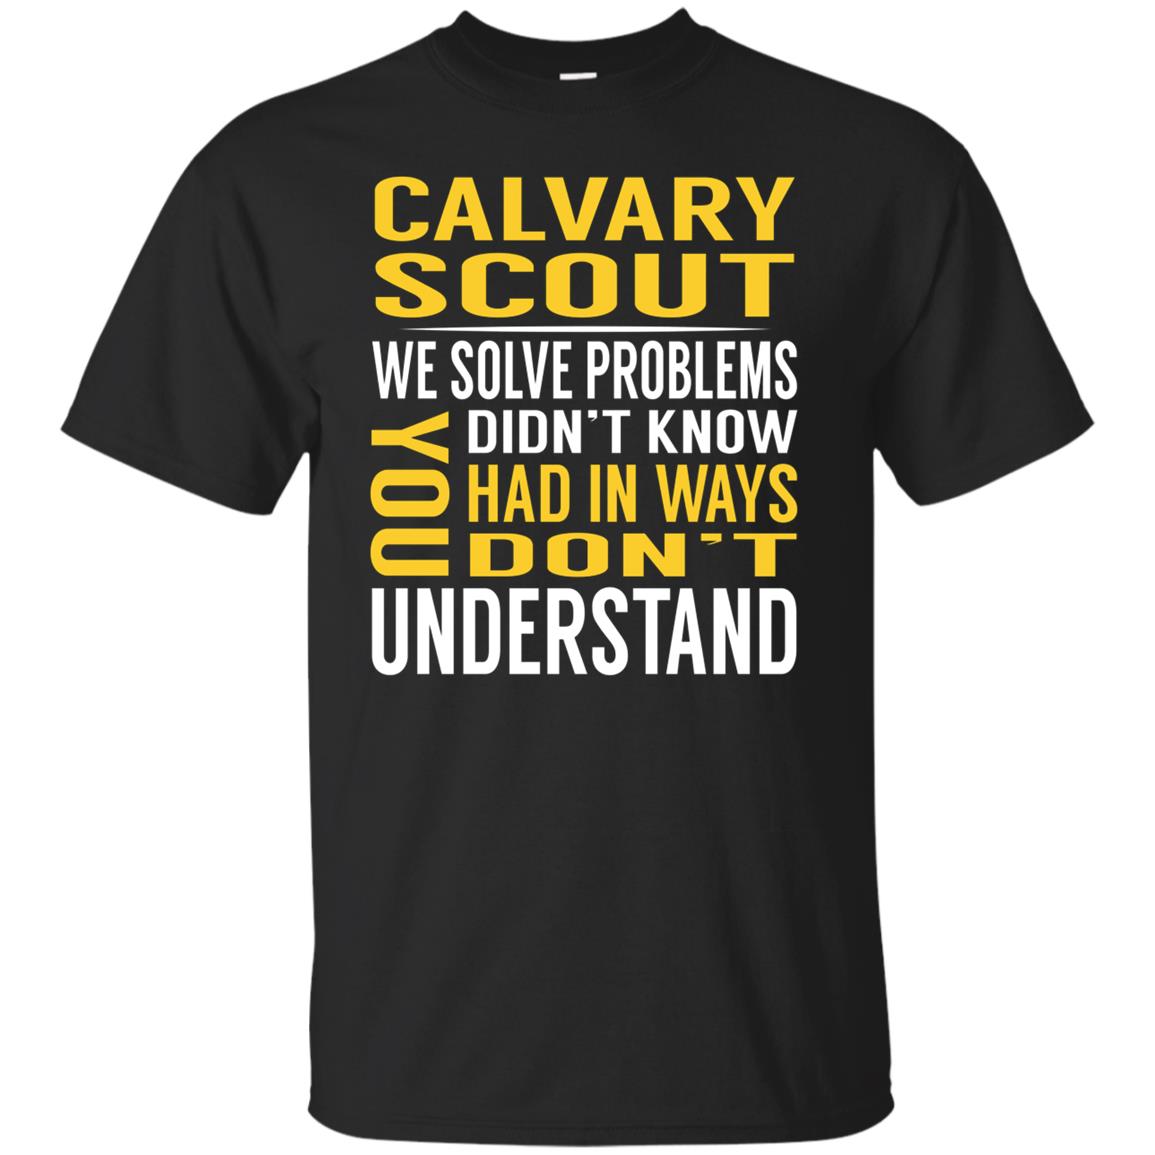 Calvary Scout Solve Problems Tshirts